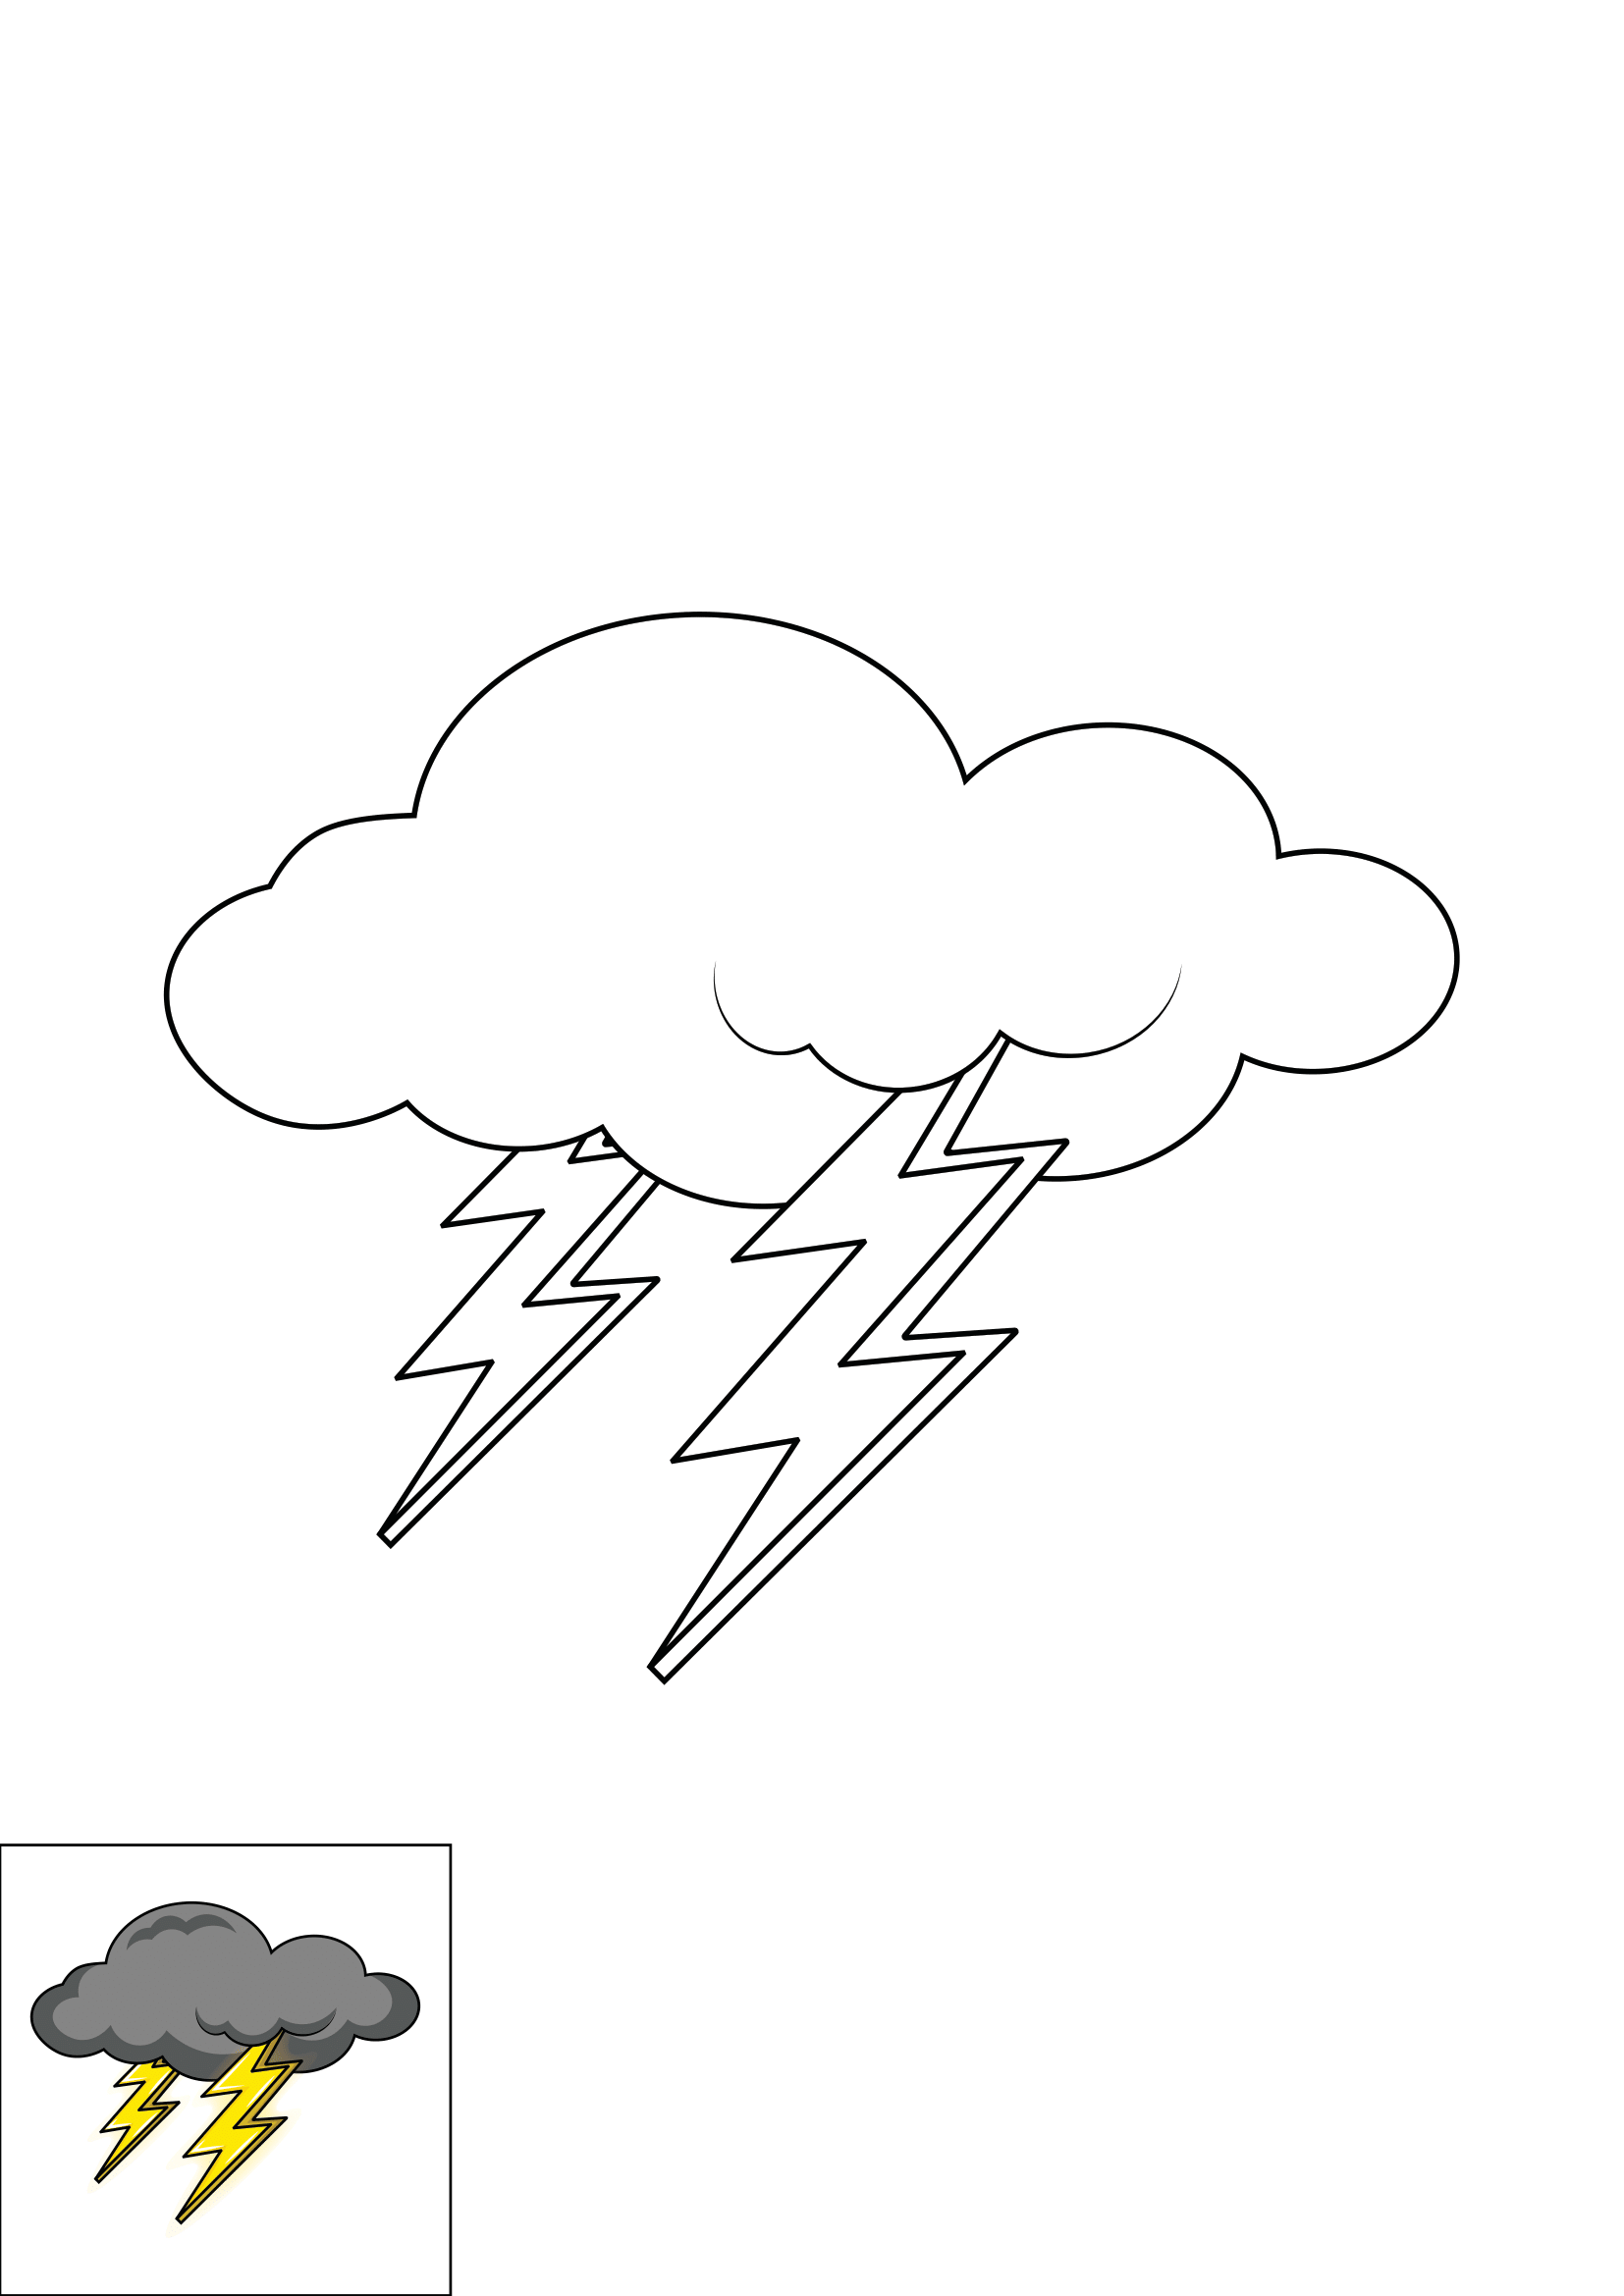 How to Draw Lightning Step by Step Printable Color